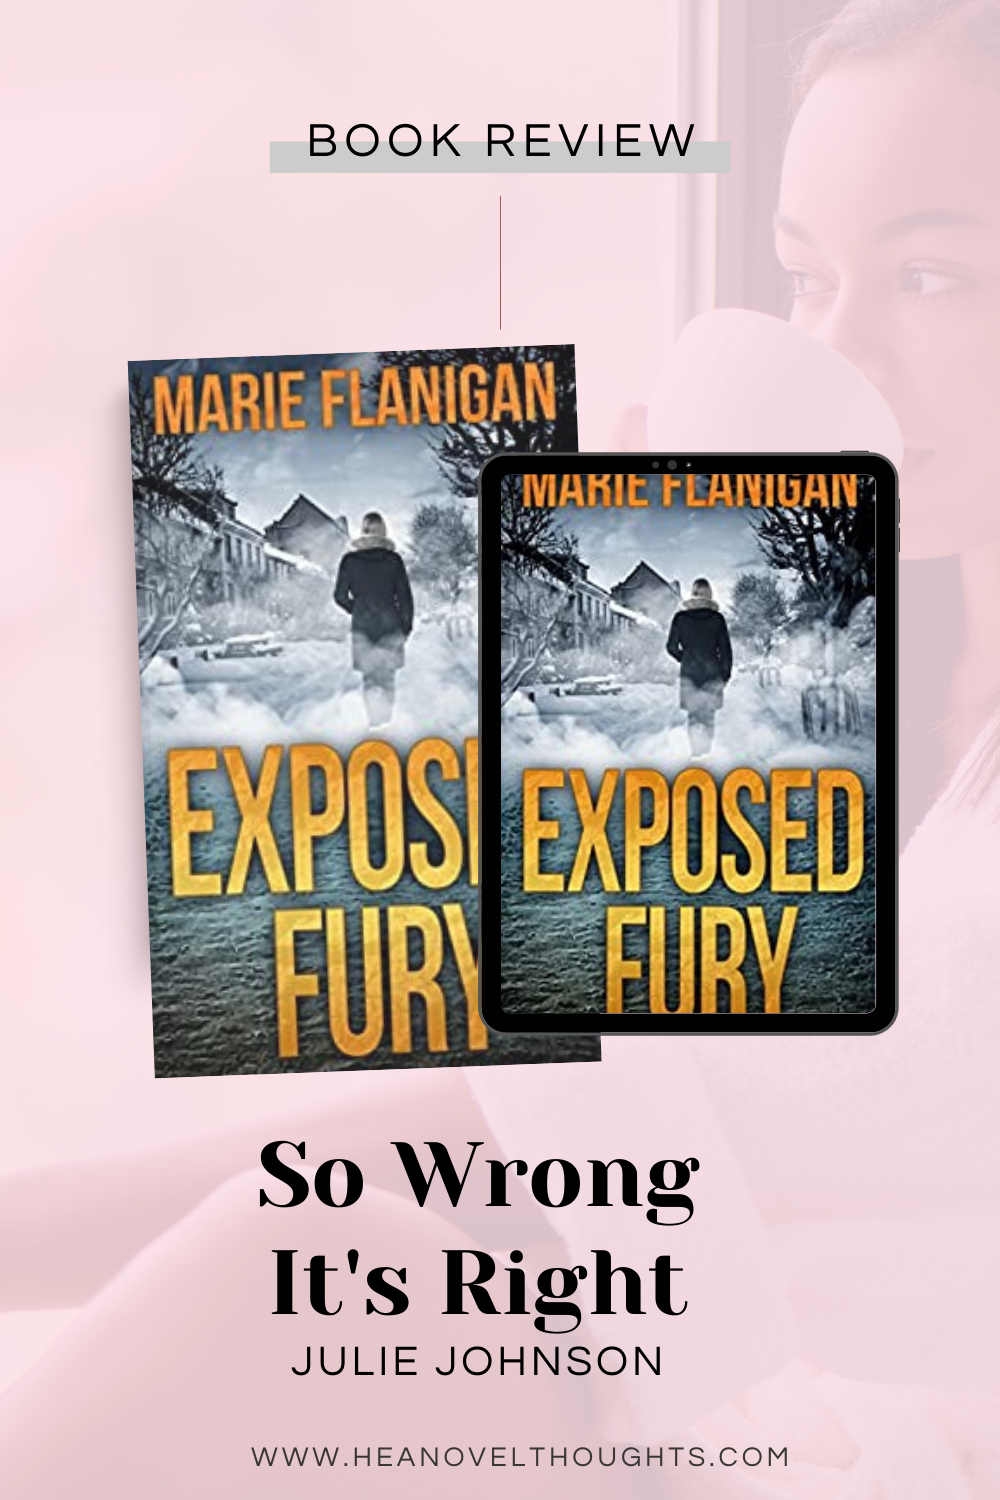 Exposed Fury by Marie Flanigan